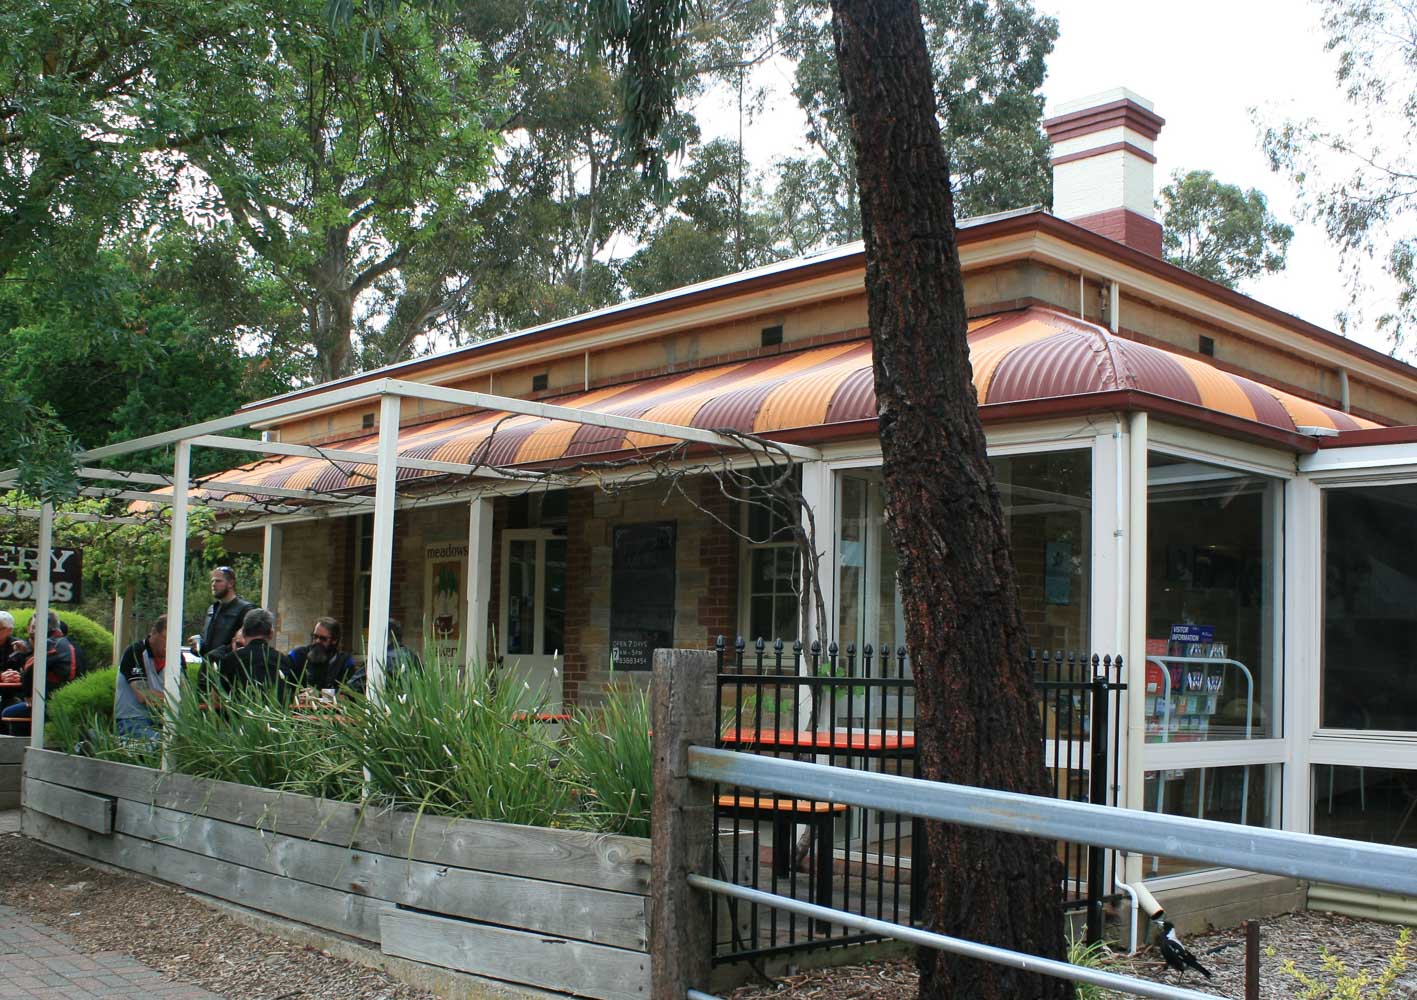 The Meadows bakery is one of the popular destinations in the Adelaide Hills